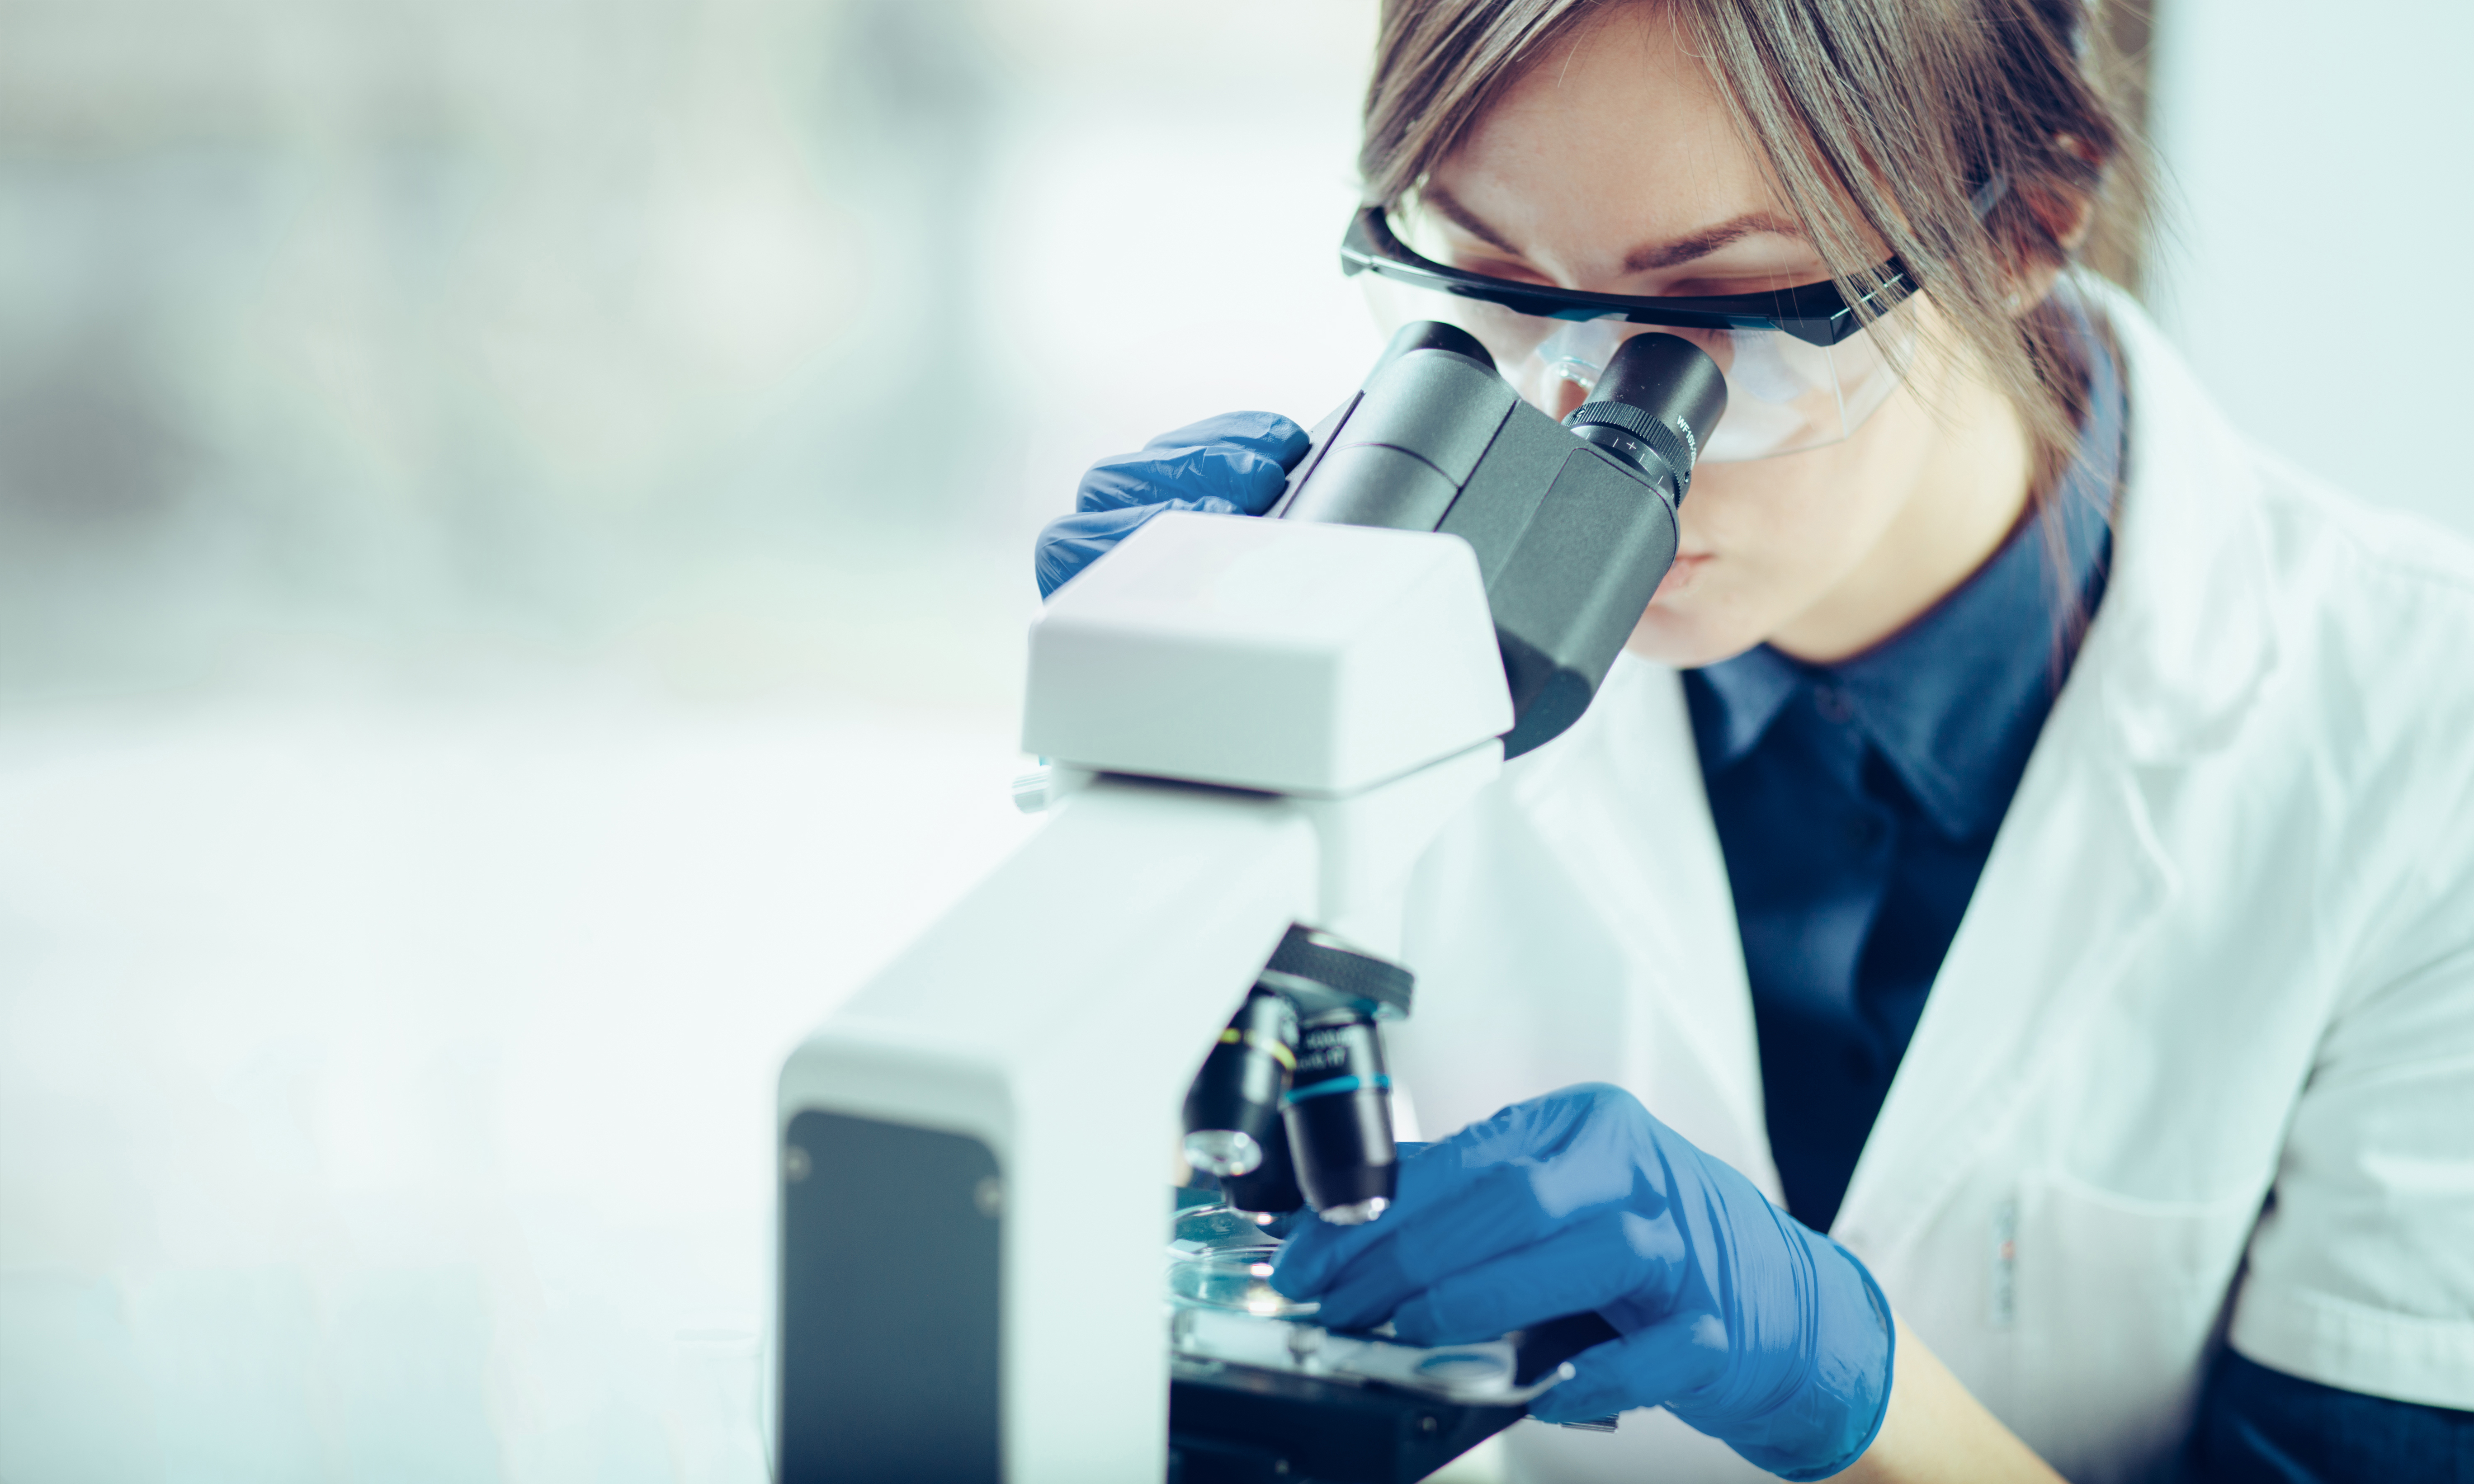 A young female researcher wearing safety glasses and a lab coat looks into a microscope.